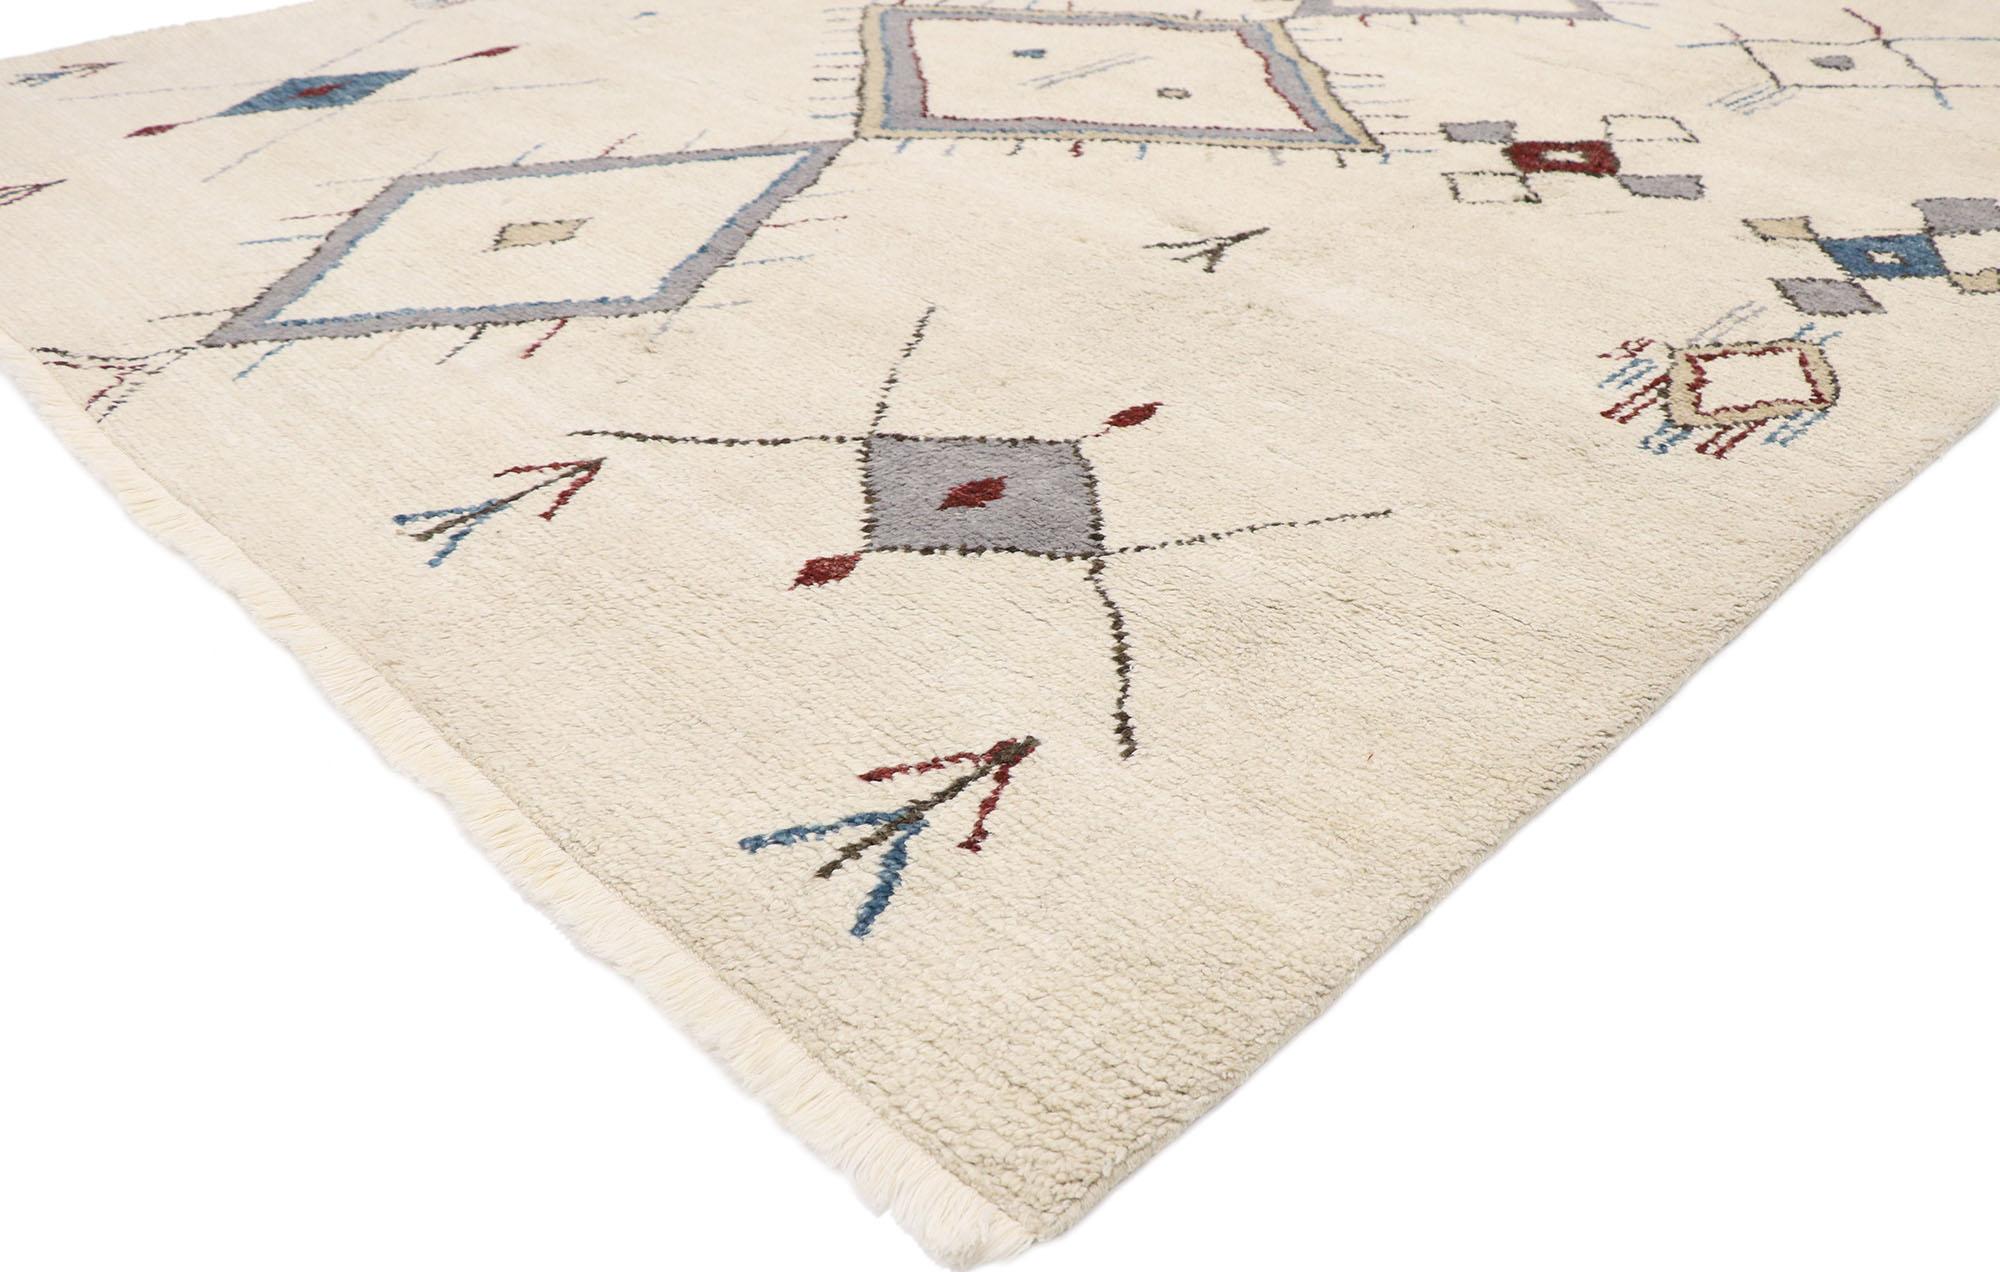 30320, New Contemporary Moroccan Style Rug 07'10 x 09'08. Warm and inviting, this hand-knotted wool contemporary Moroccan style area rug is perfect for a ski chalet with bohemian vibes. Diamonds, stacked lozenges, twig-like motifs, and geometric